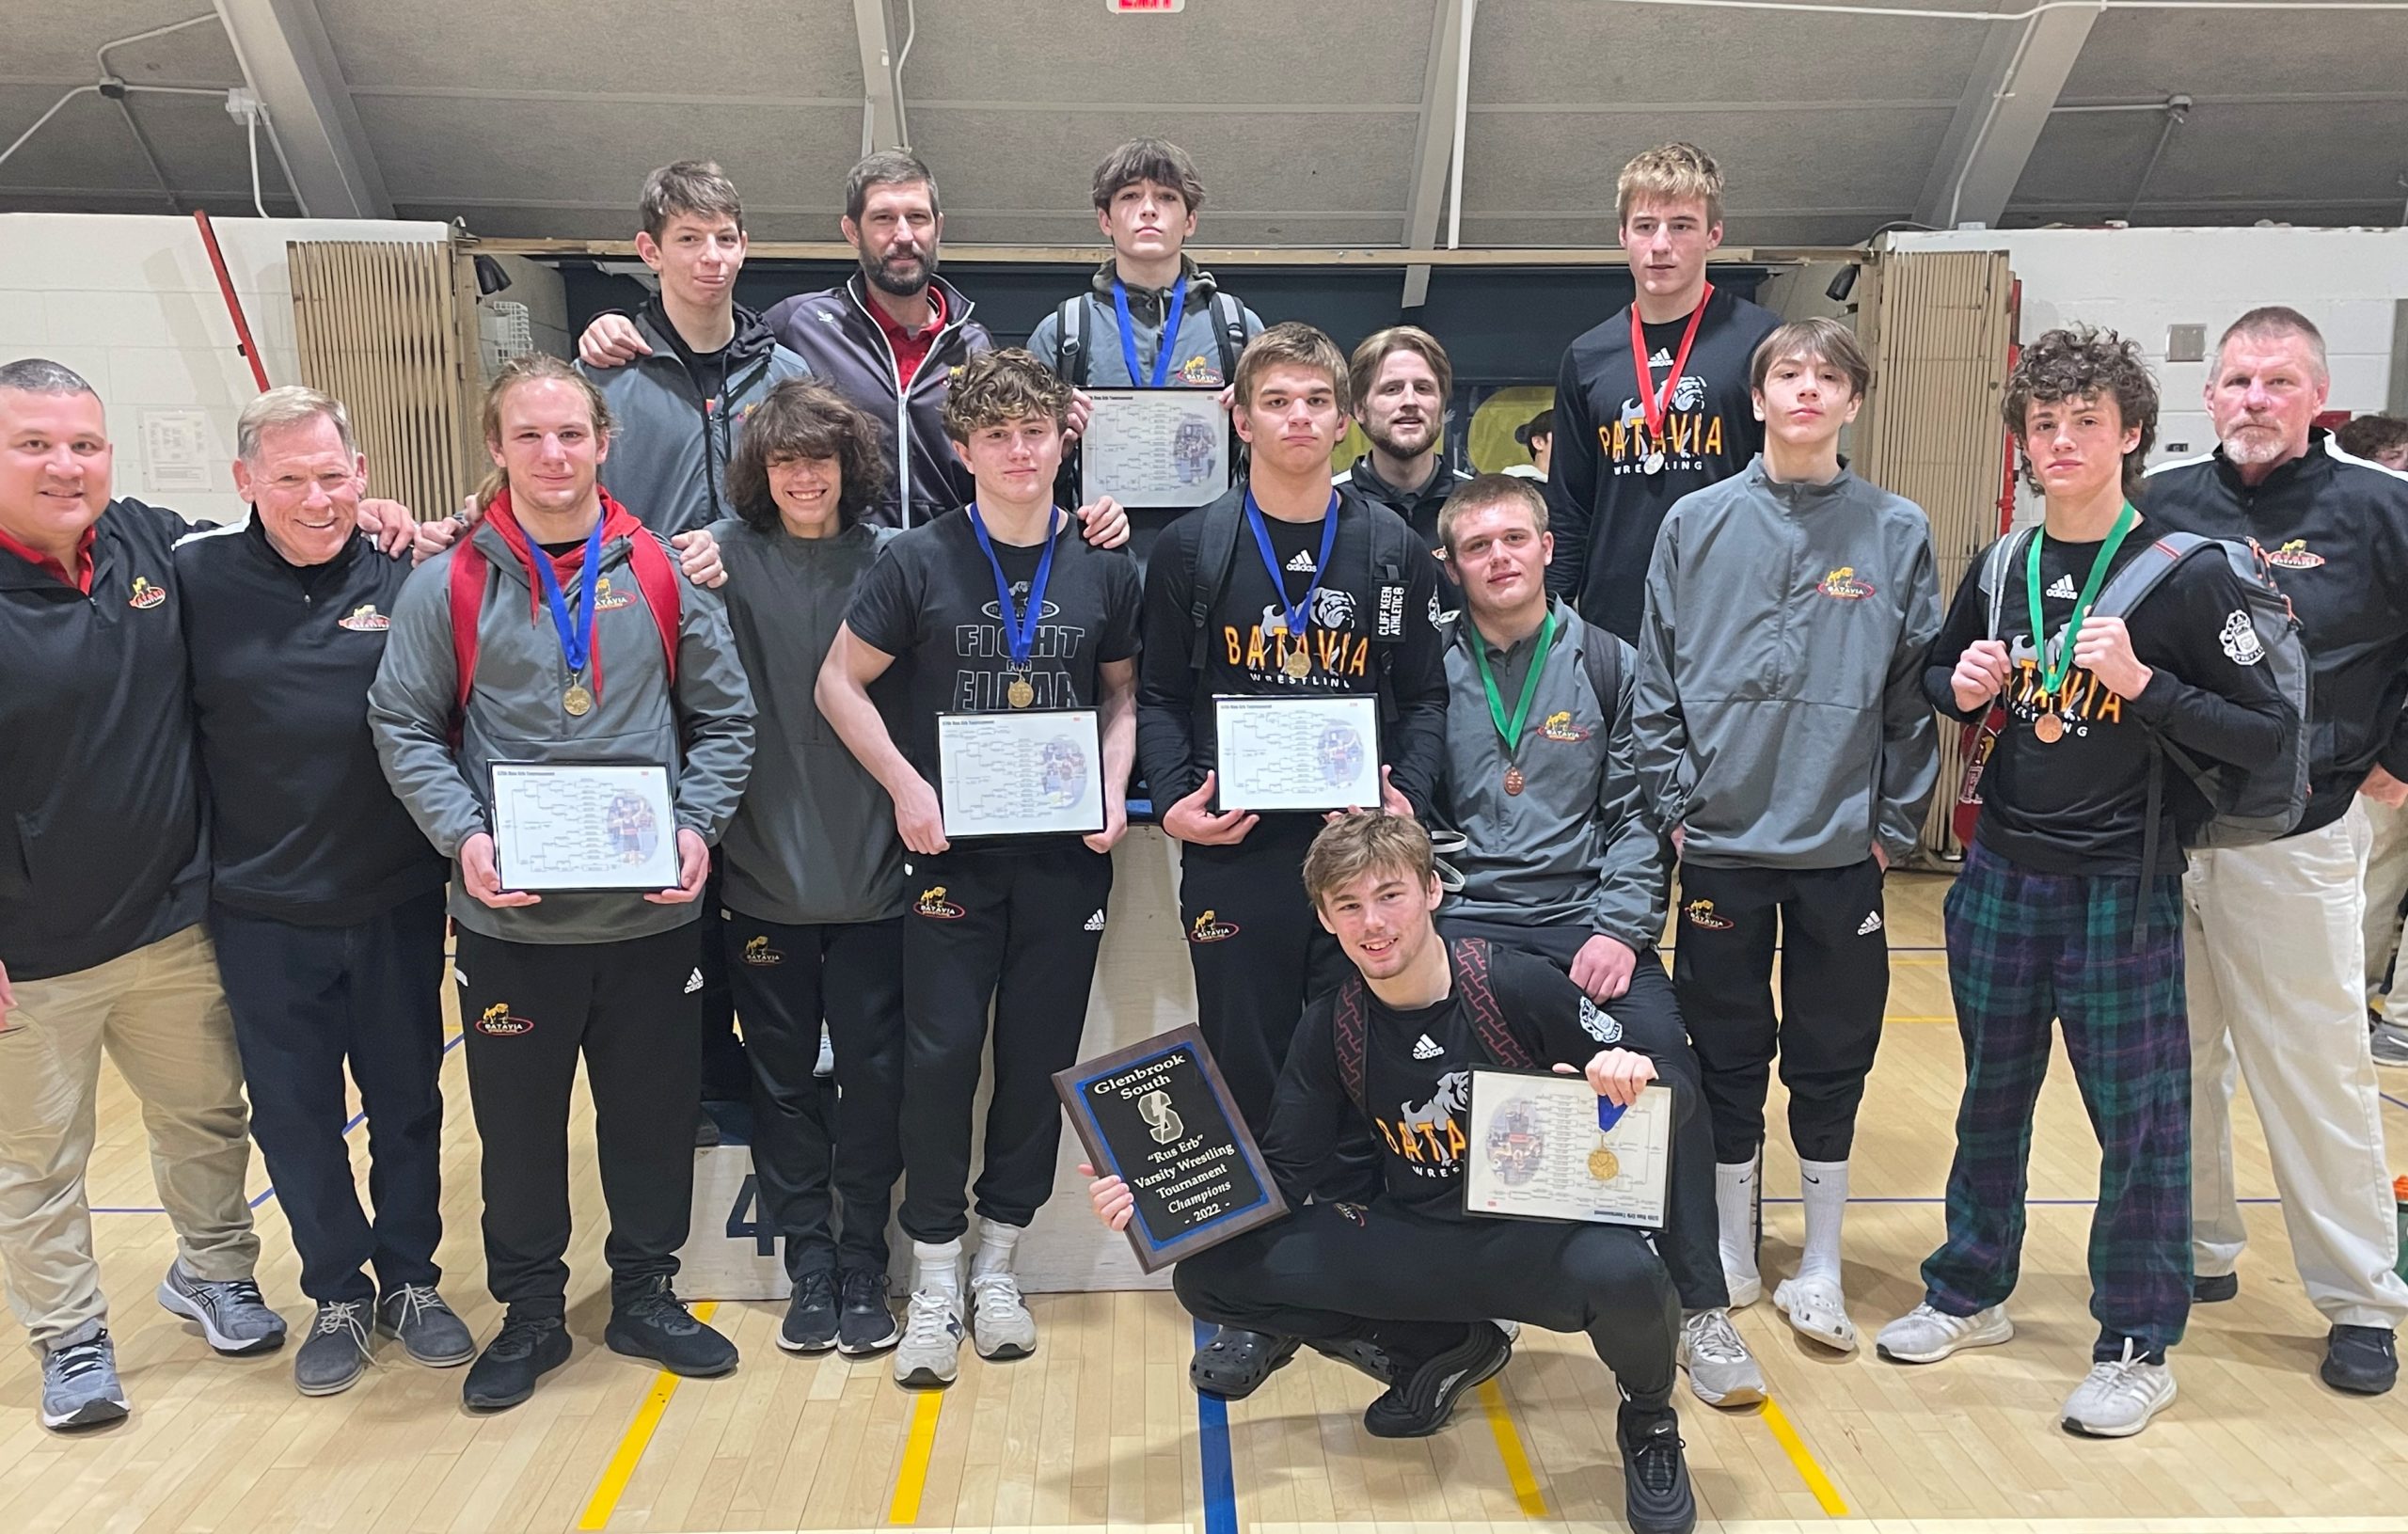 Batavia ready Coaches Glenbrook Invite roll winning Association to and after Illinois Erb Wrestling title South Officials 